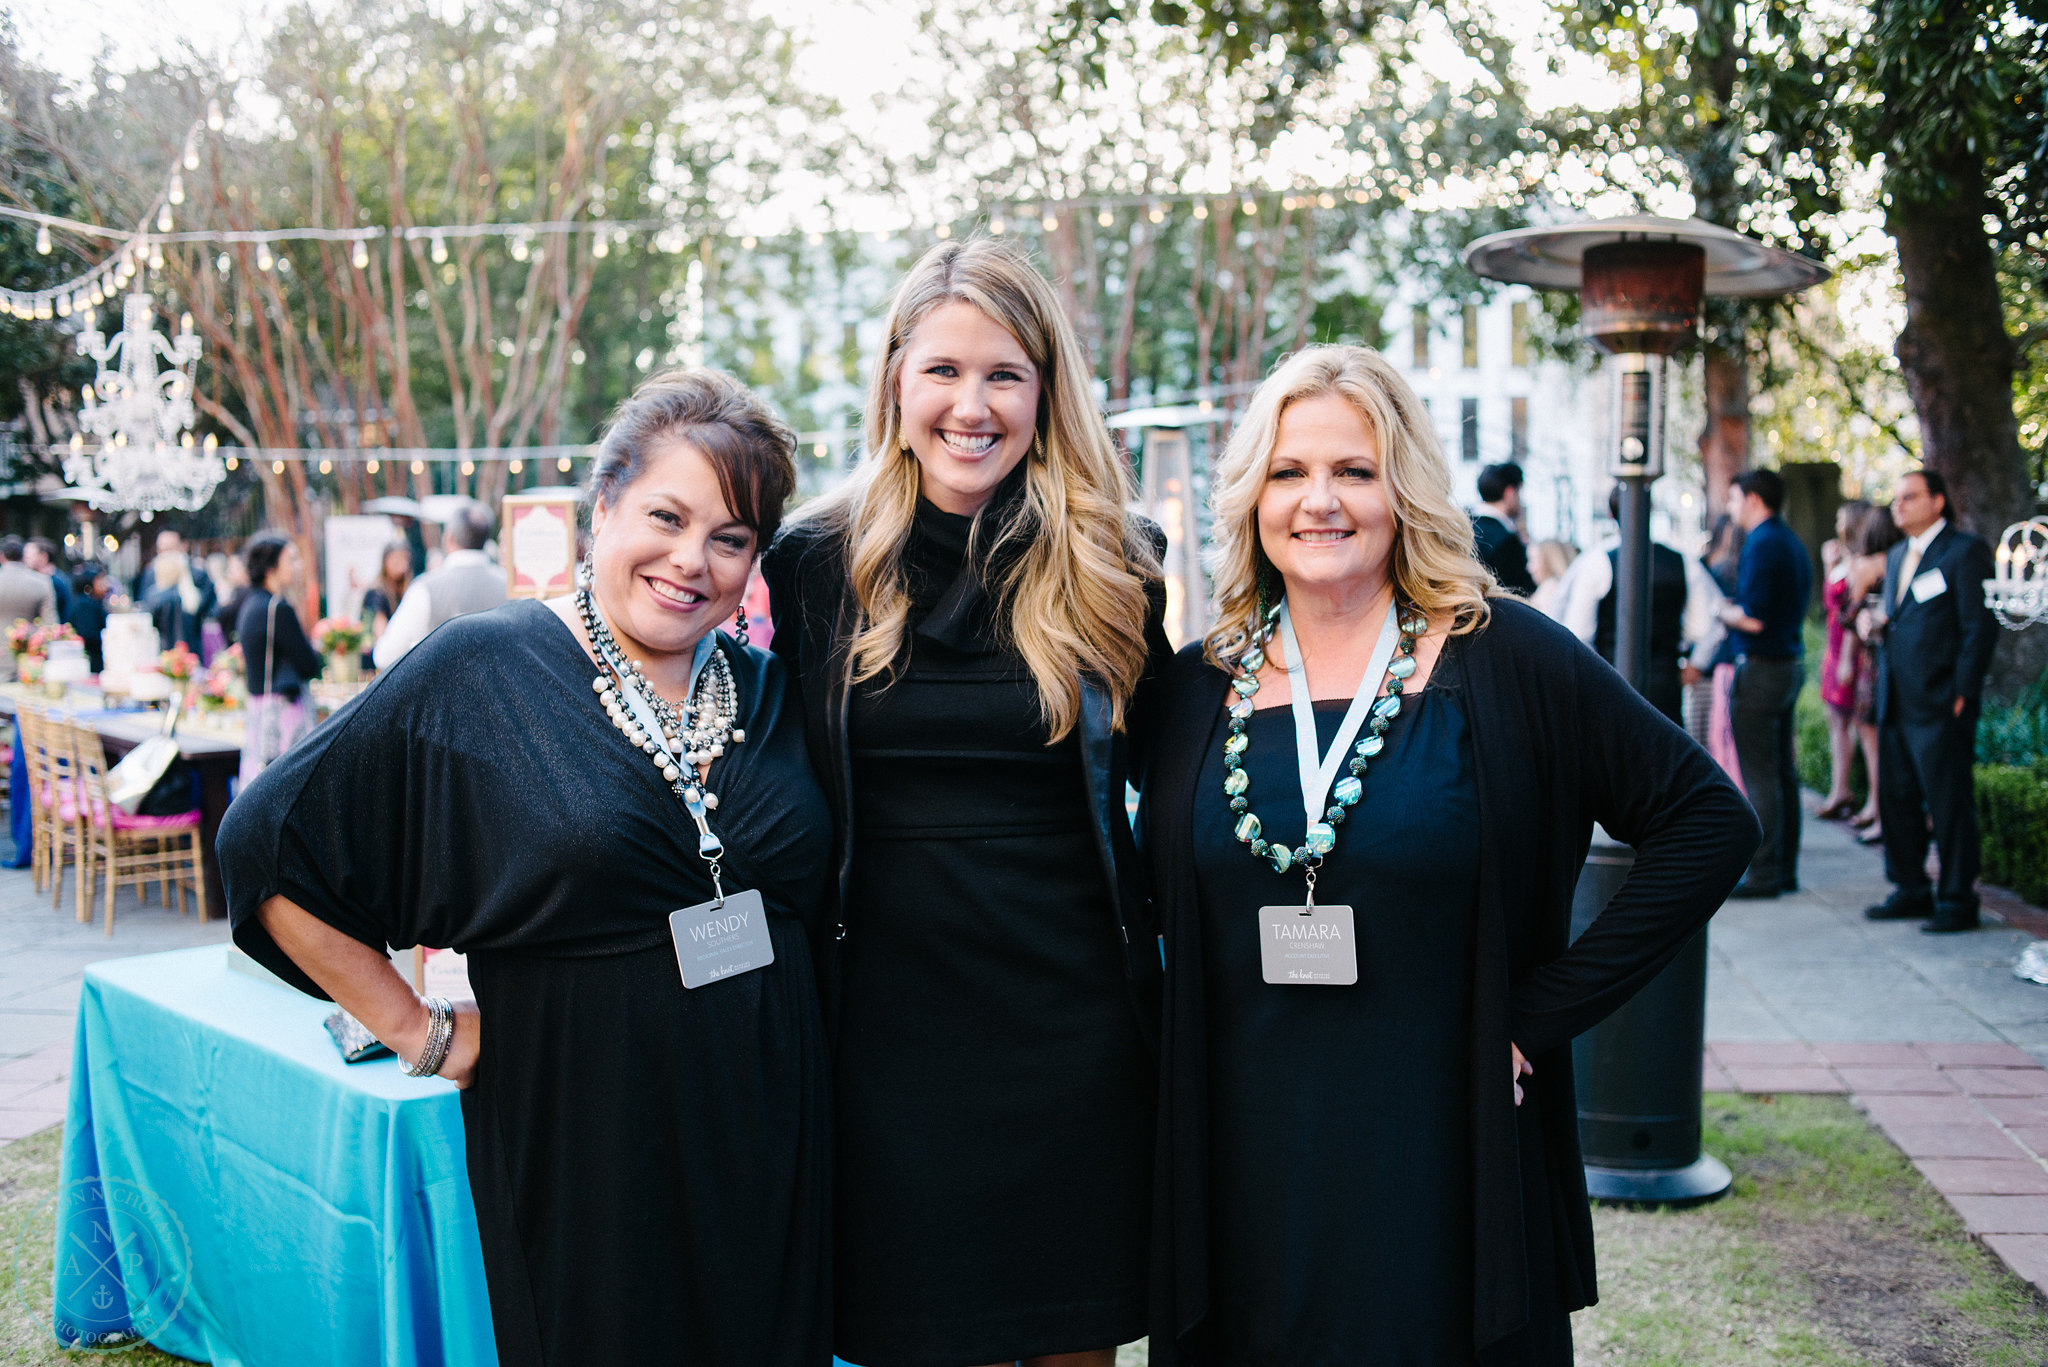 The lovely ladies of The Knot and sponsors of the 2014 Annual Market Mixer.